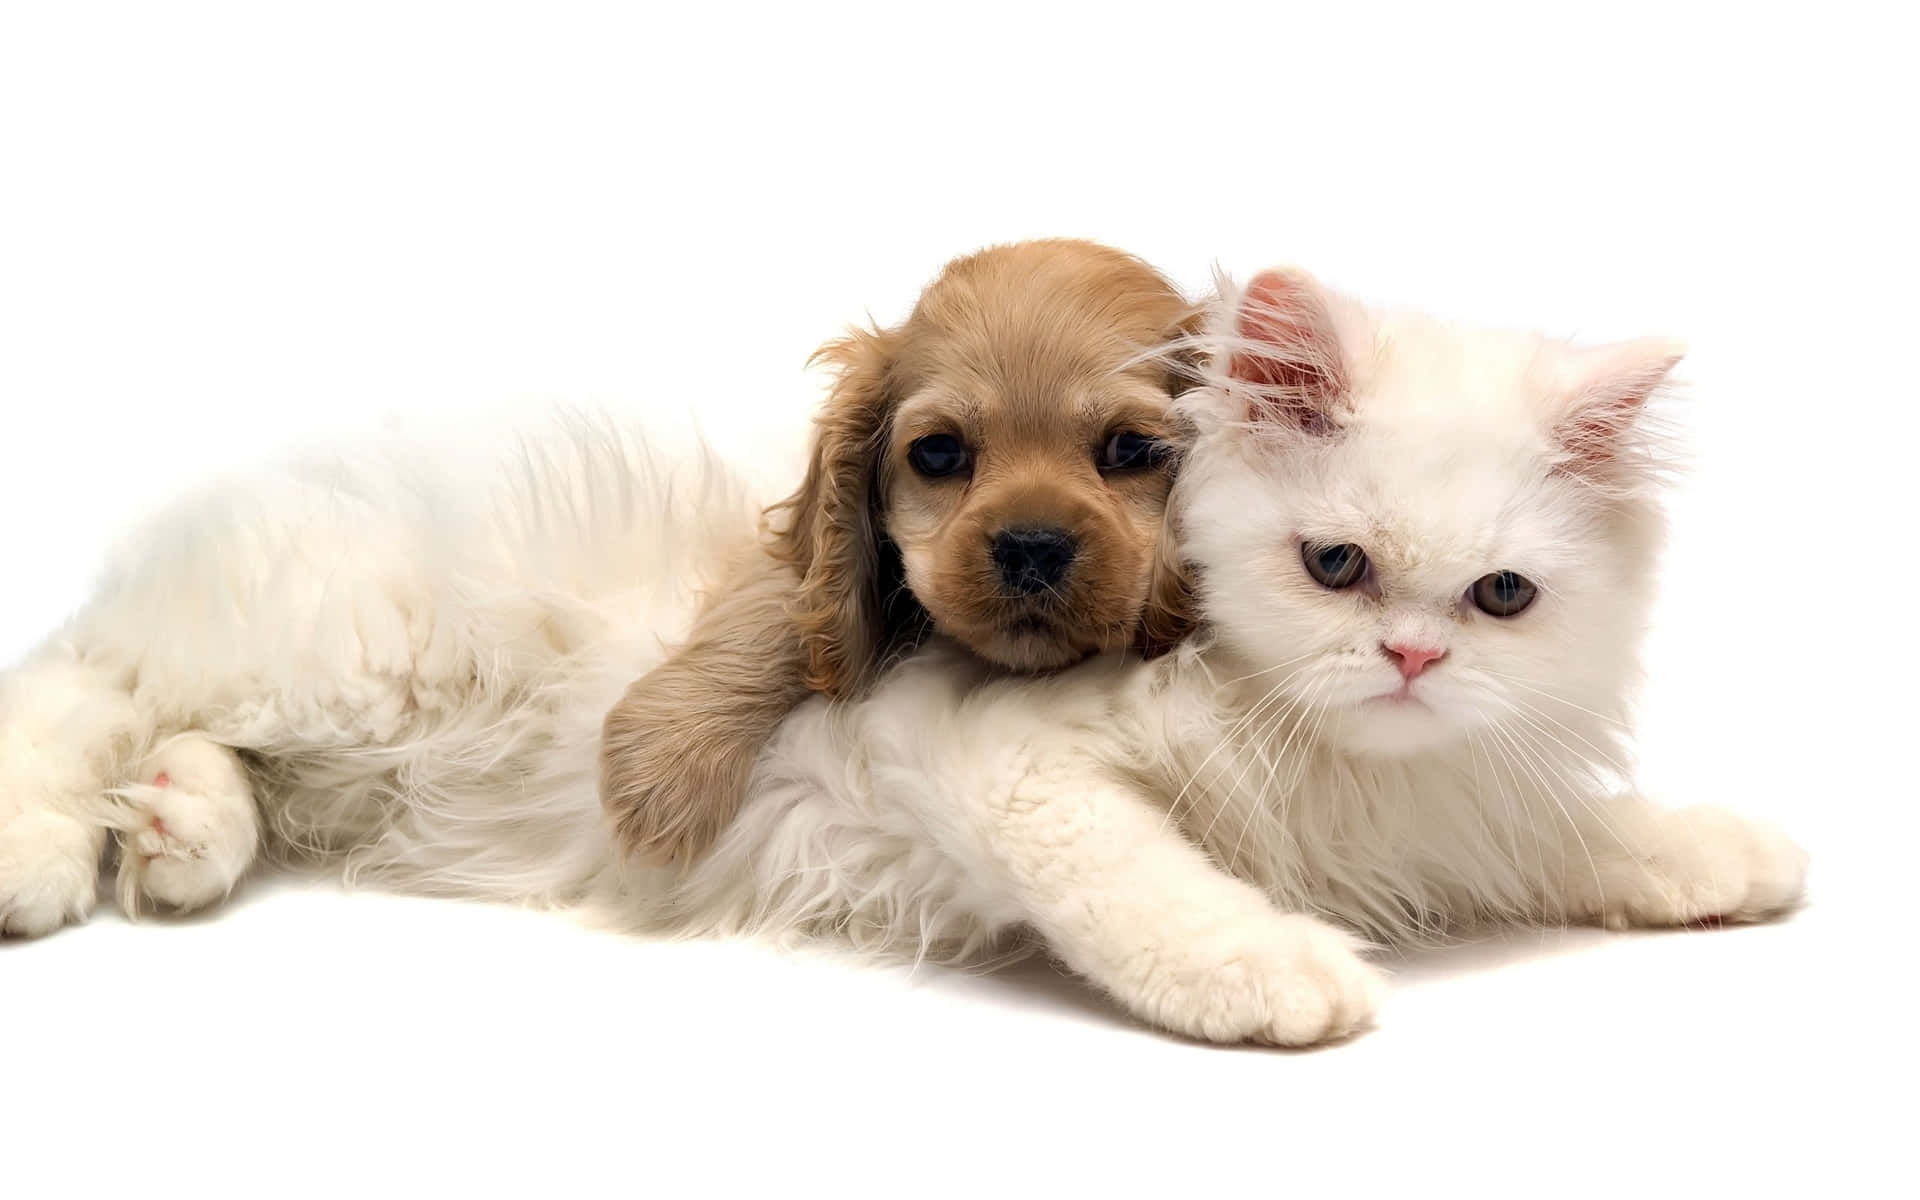 Cat And Dog Pictures